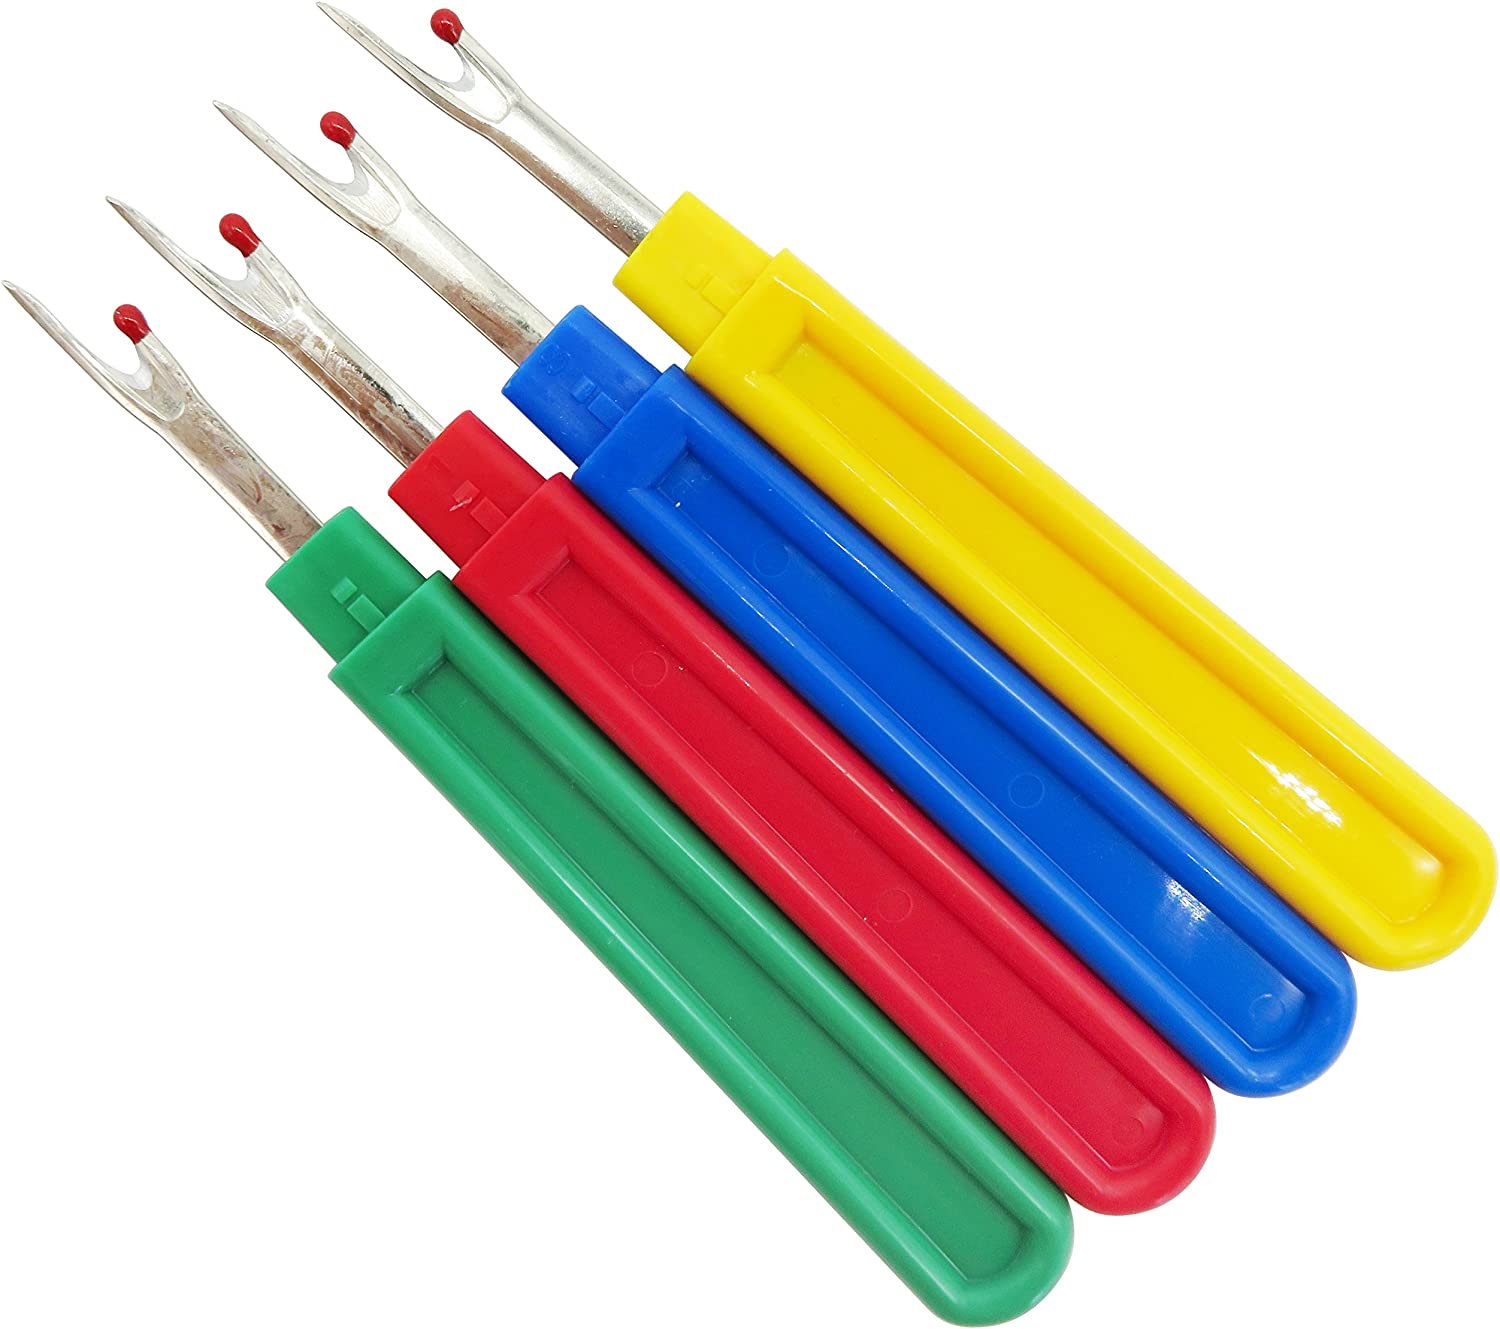 24 Pieces Colorful Seam Ripper Tool Handy Stitch Ripper Sewing Ripper for Opening Removing Seams and Hems